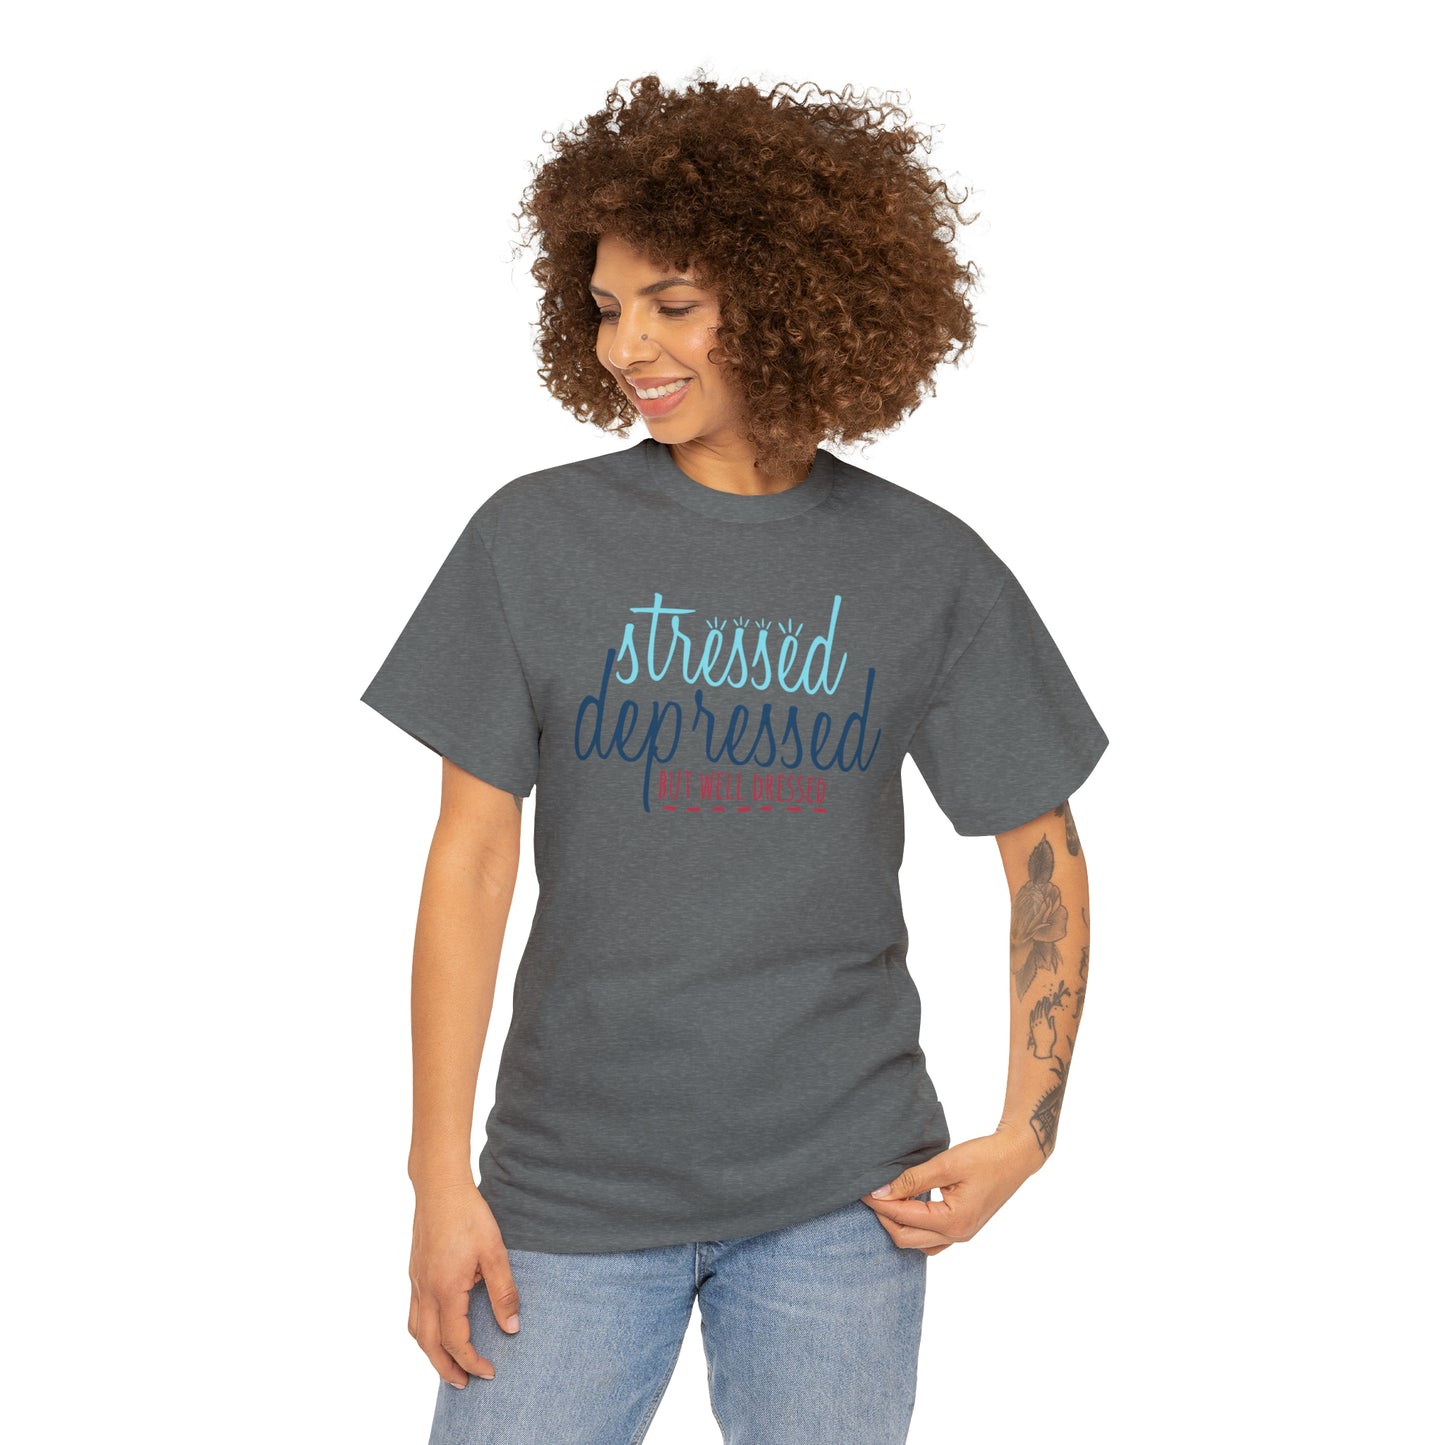 "Stressed, Depressed, But Well Dressed" T-Shirt - Weave Got Gifts - Unique Gifts You Won’t Find Anywhere Else!